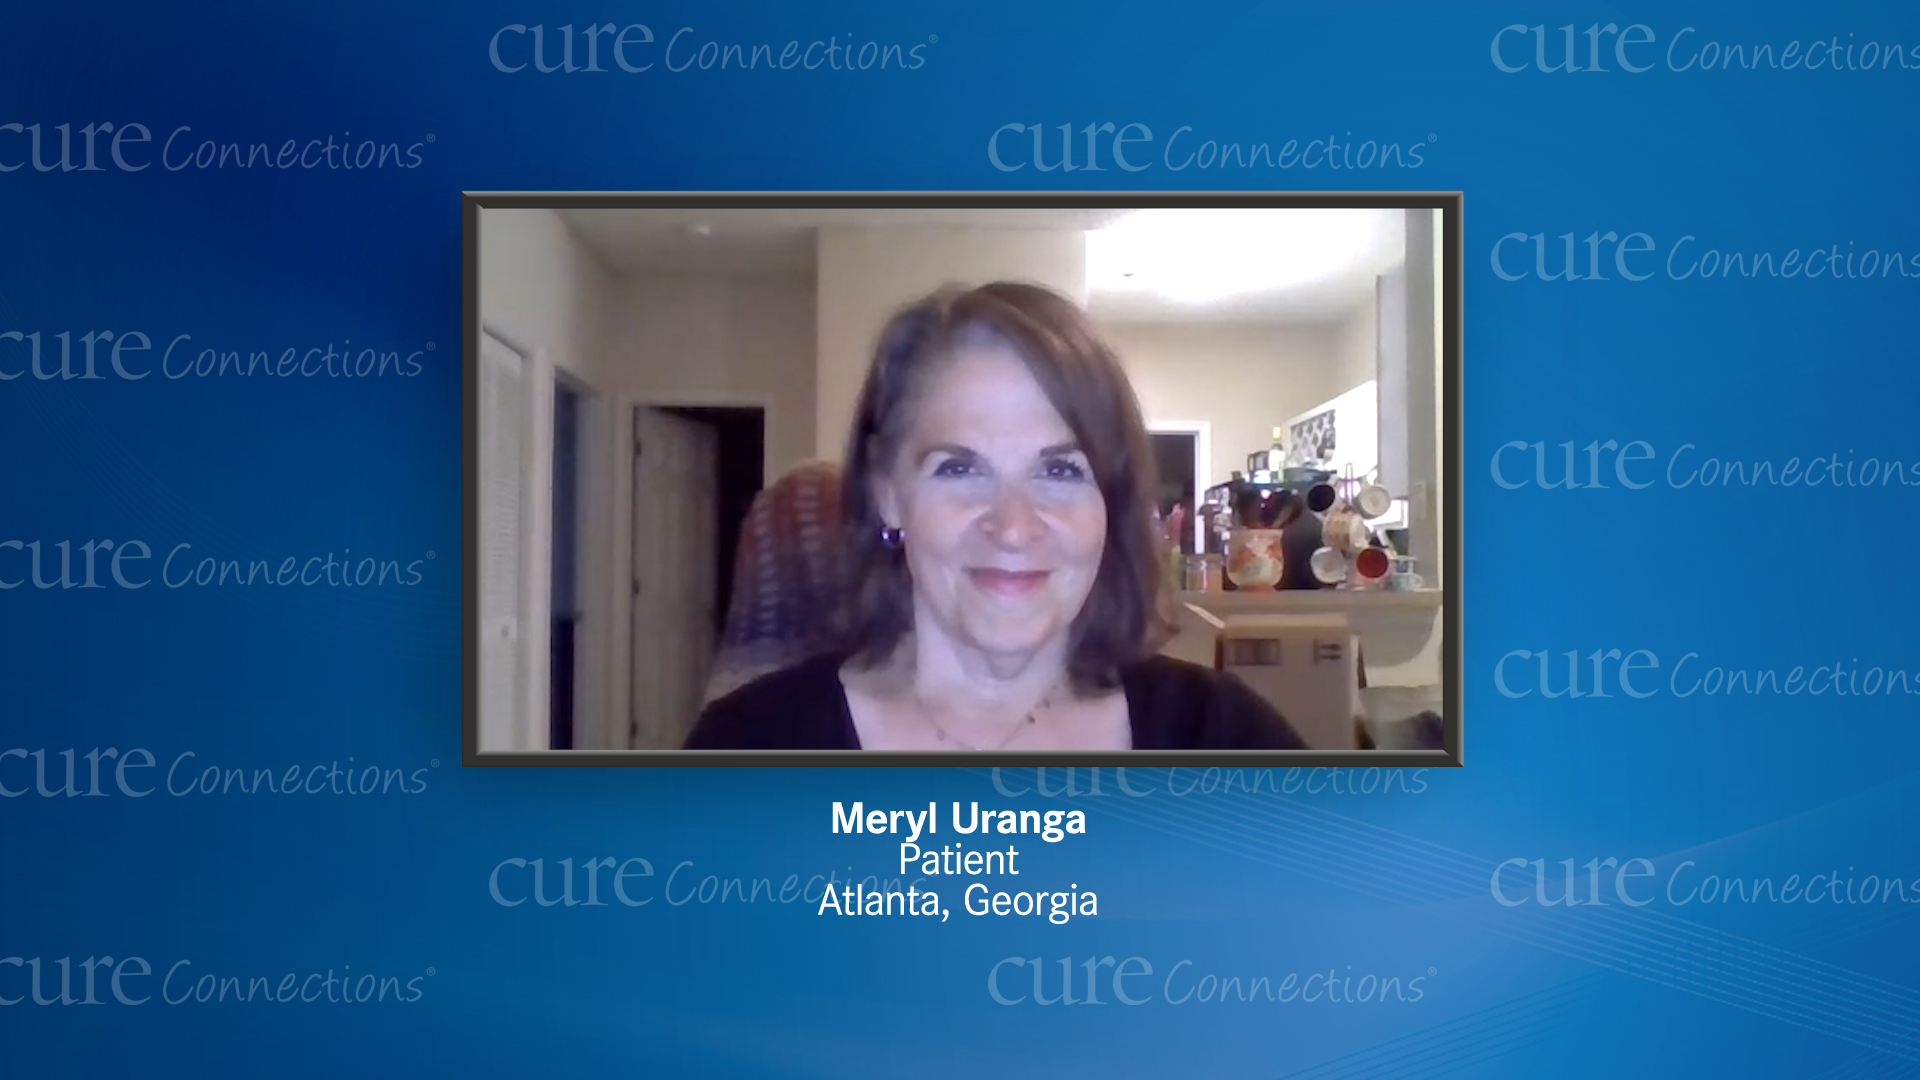 A Patient’s Perspective on Choosing Systemic Therapy for Metastatic RCC